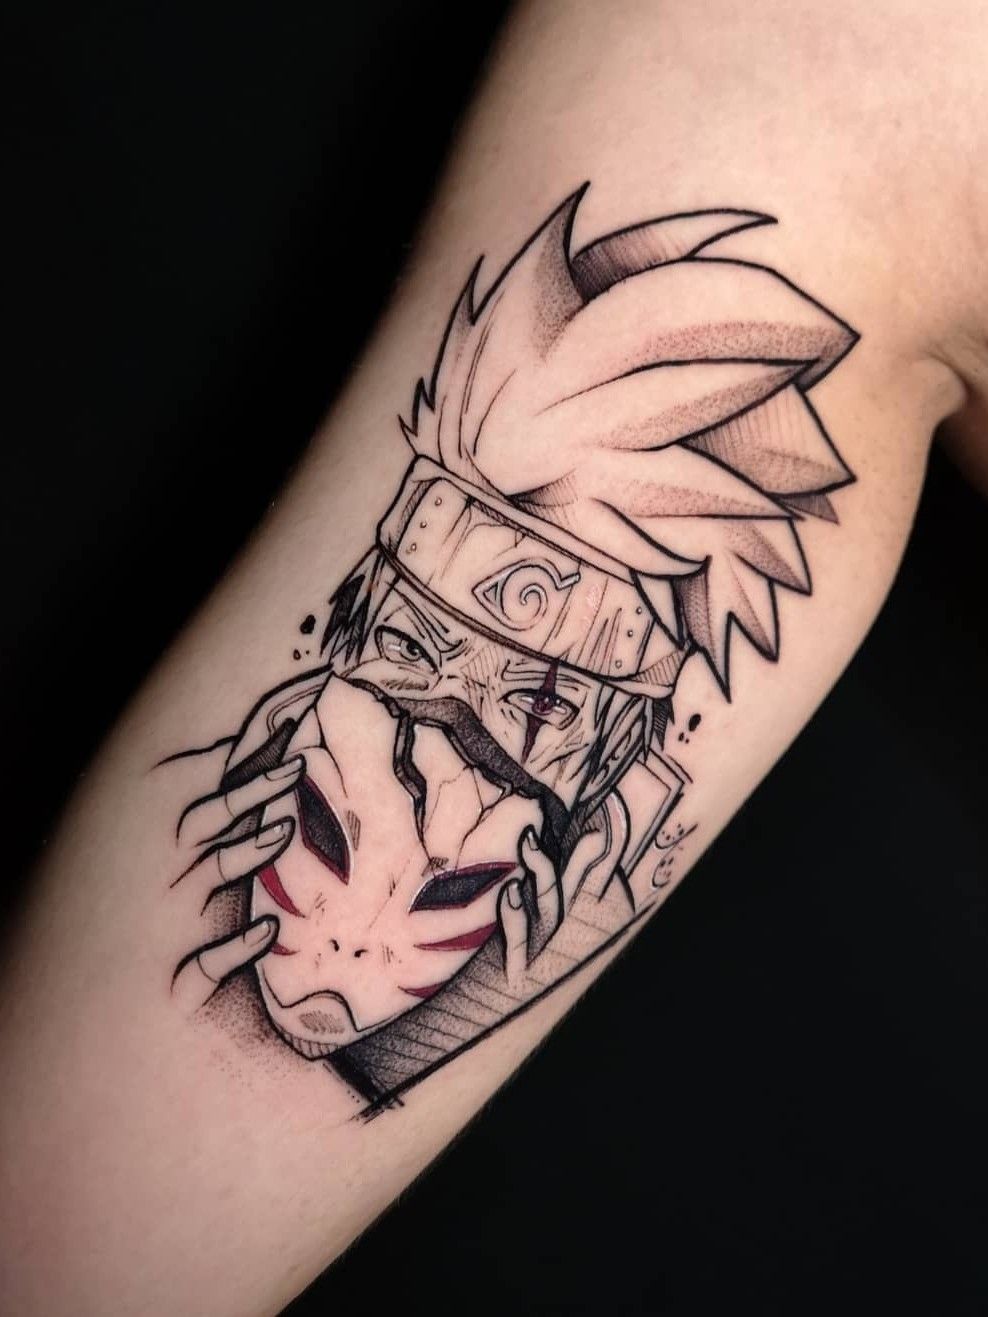 World's Top Tattoo Artists - Naruto tattoos done by © Egor Kabishev |  Facebook